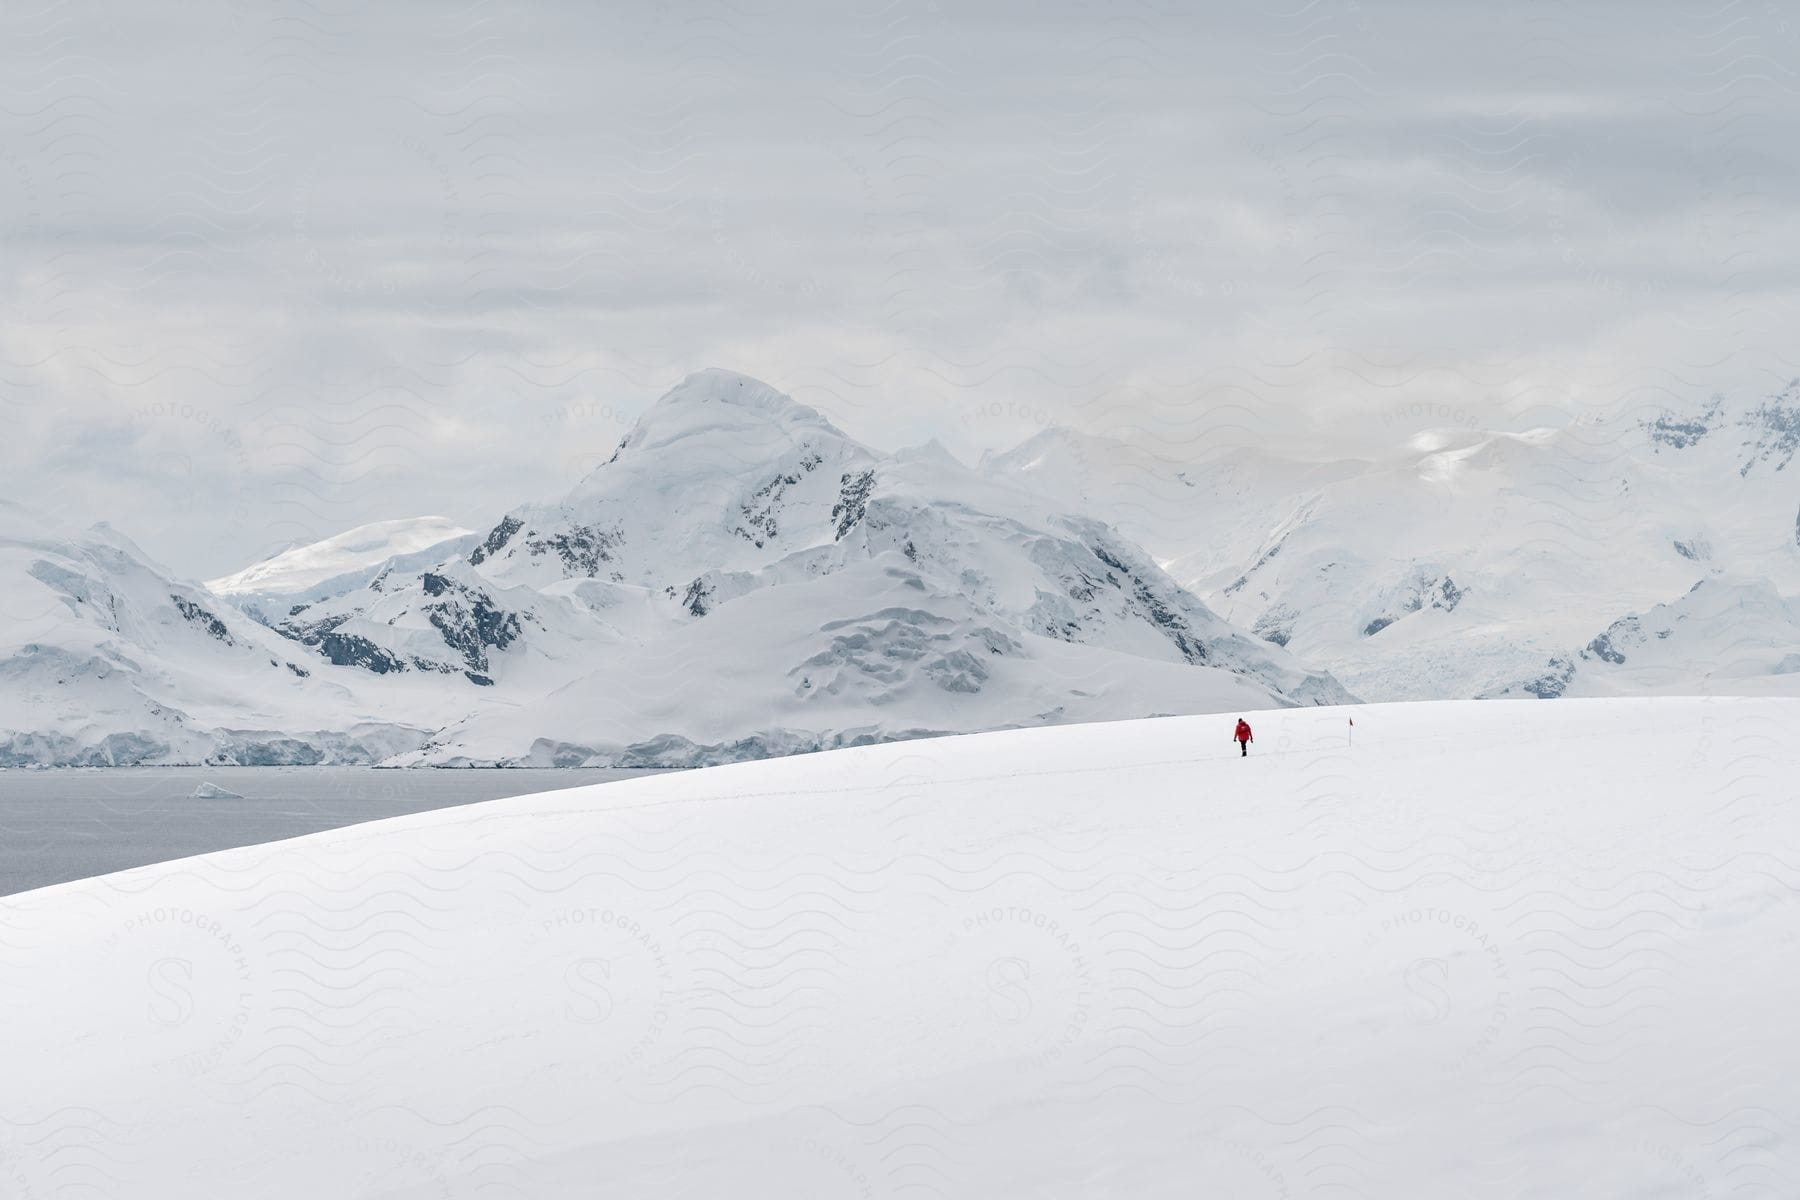 A person in red walking alone in a snowy landscape with mountains in the background